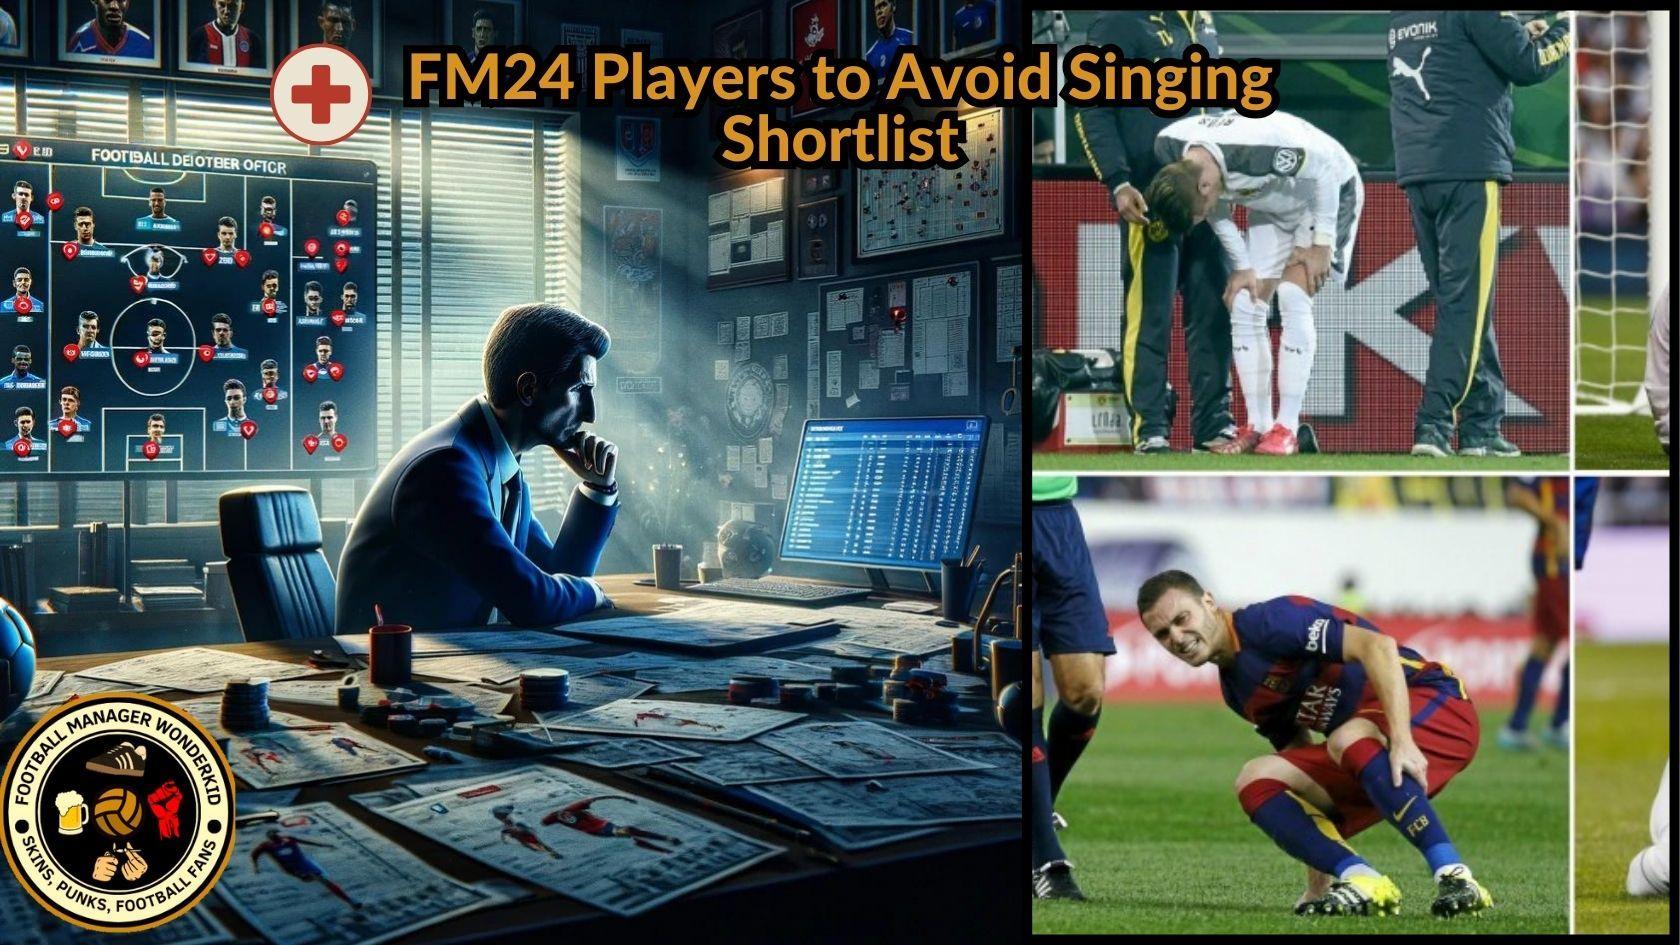 FM24 Players to Avoid Singing Shortlist